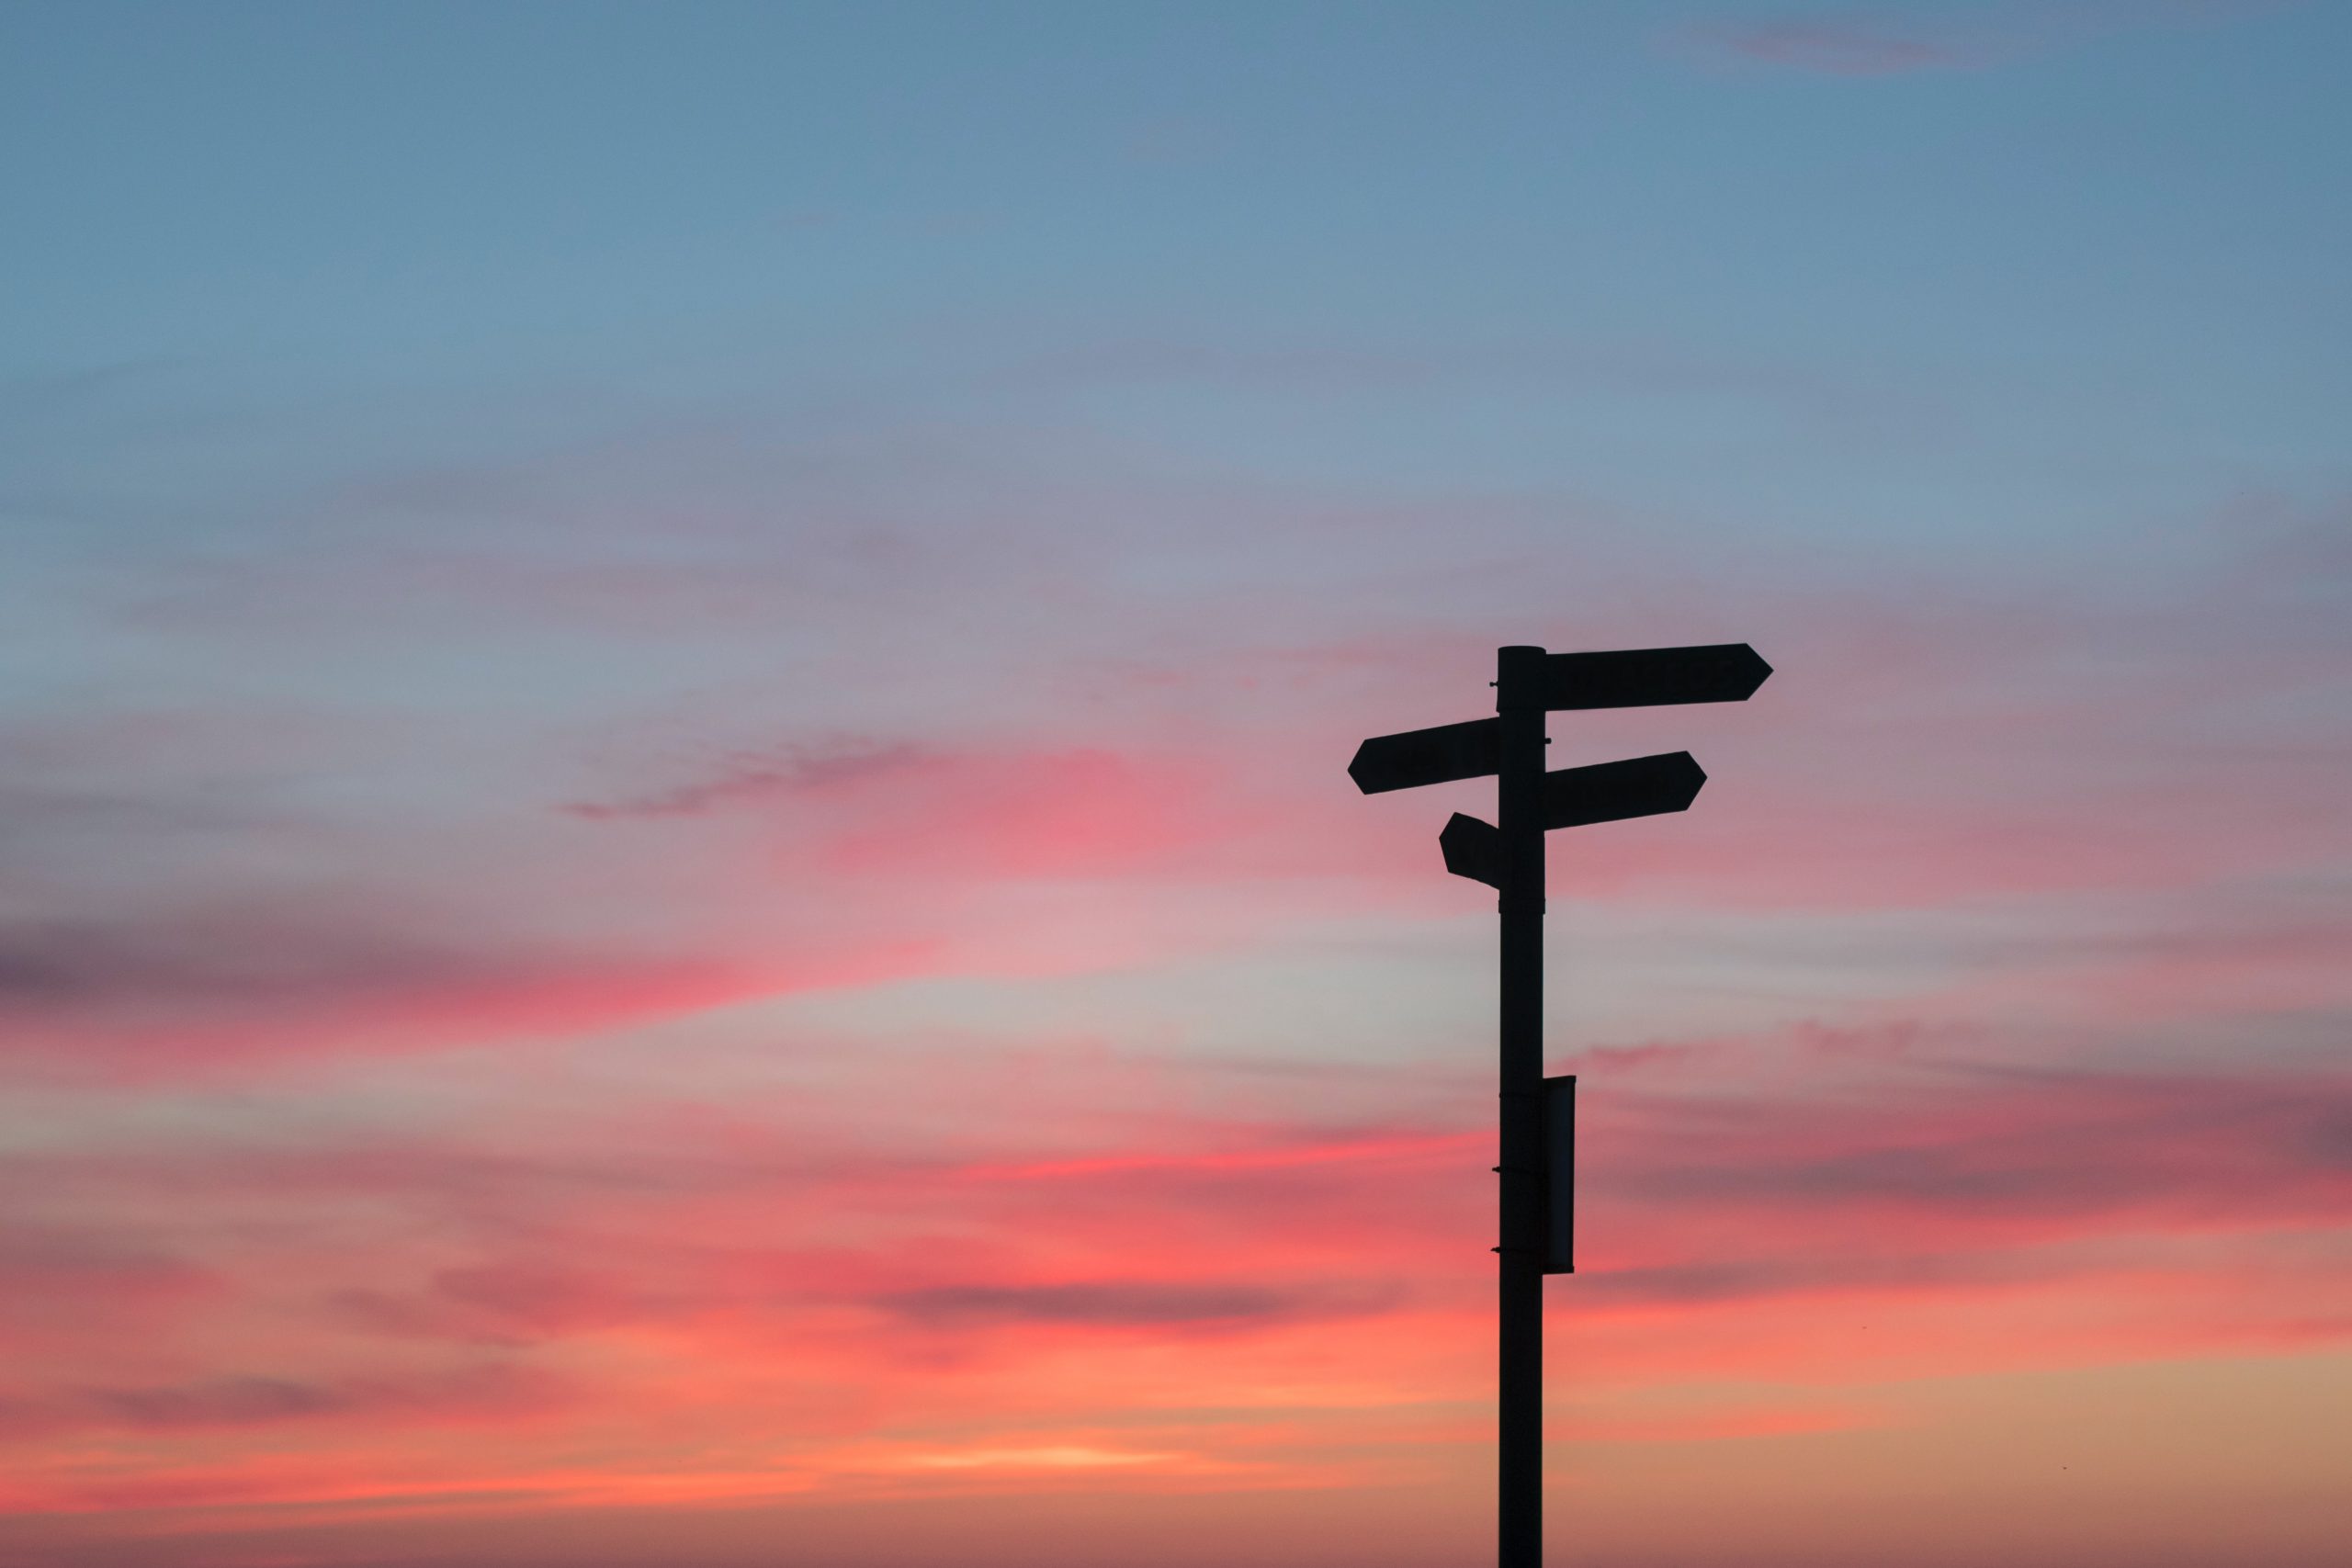 A silhouetted signpost with multiple directional arrows stands against a vibrant sunset sky. The sky is a soft gradient of pink, orange, and shades of blue, mirroring the peaceful and serene atmosphere one can find at Khiron Clinics during trauma treatment.